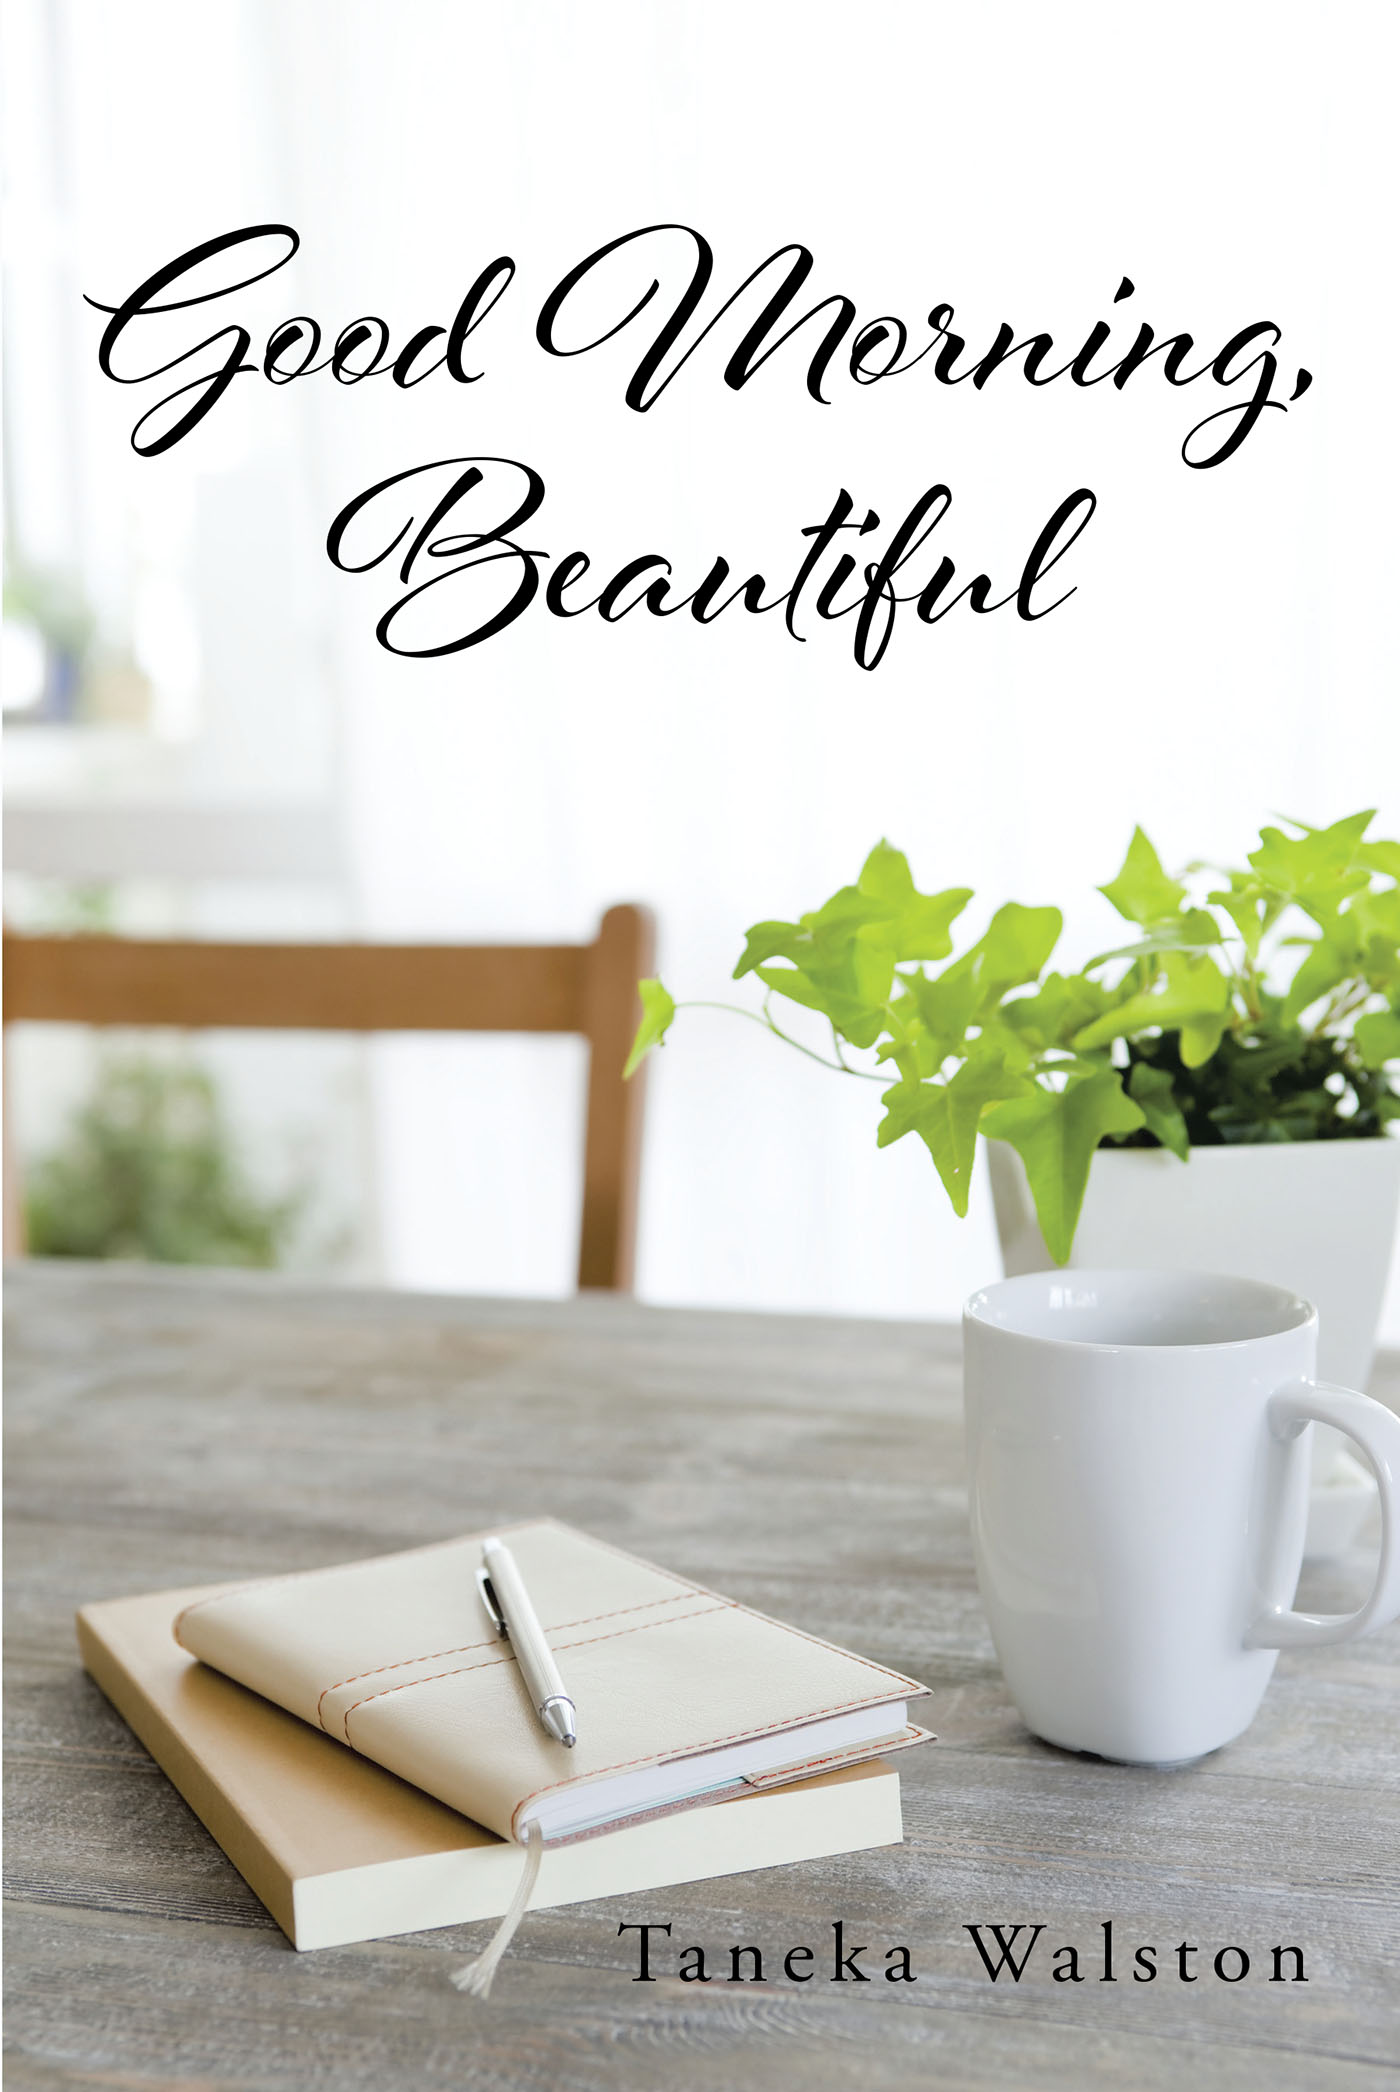 Taneka Walston’s Newly Released "Good Morning, Beautiful" is an Encouraging and Interactive Approach to Daily Reflection and Prayer